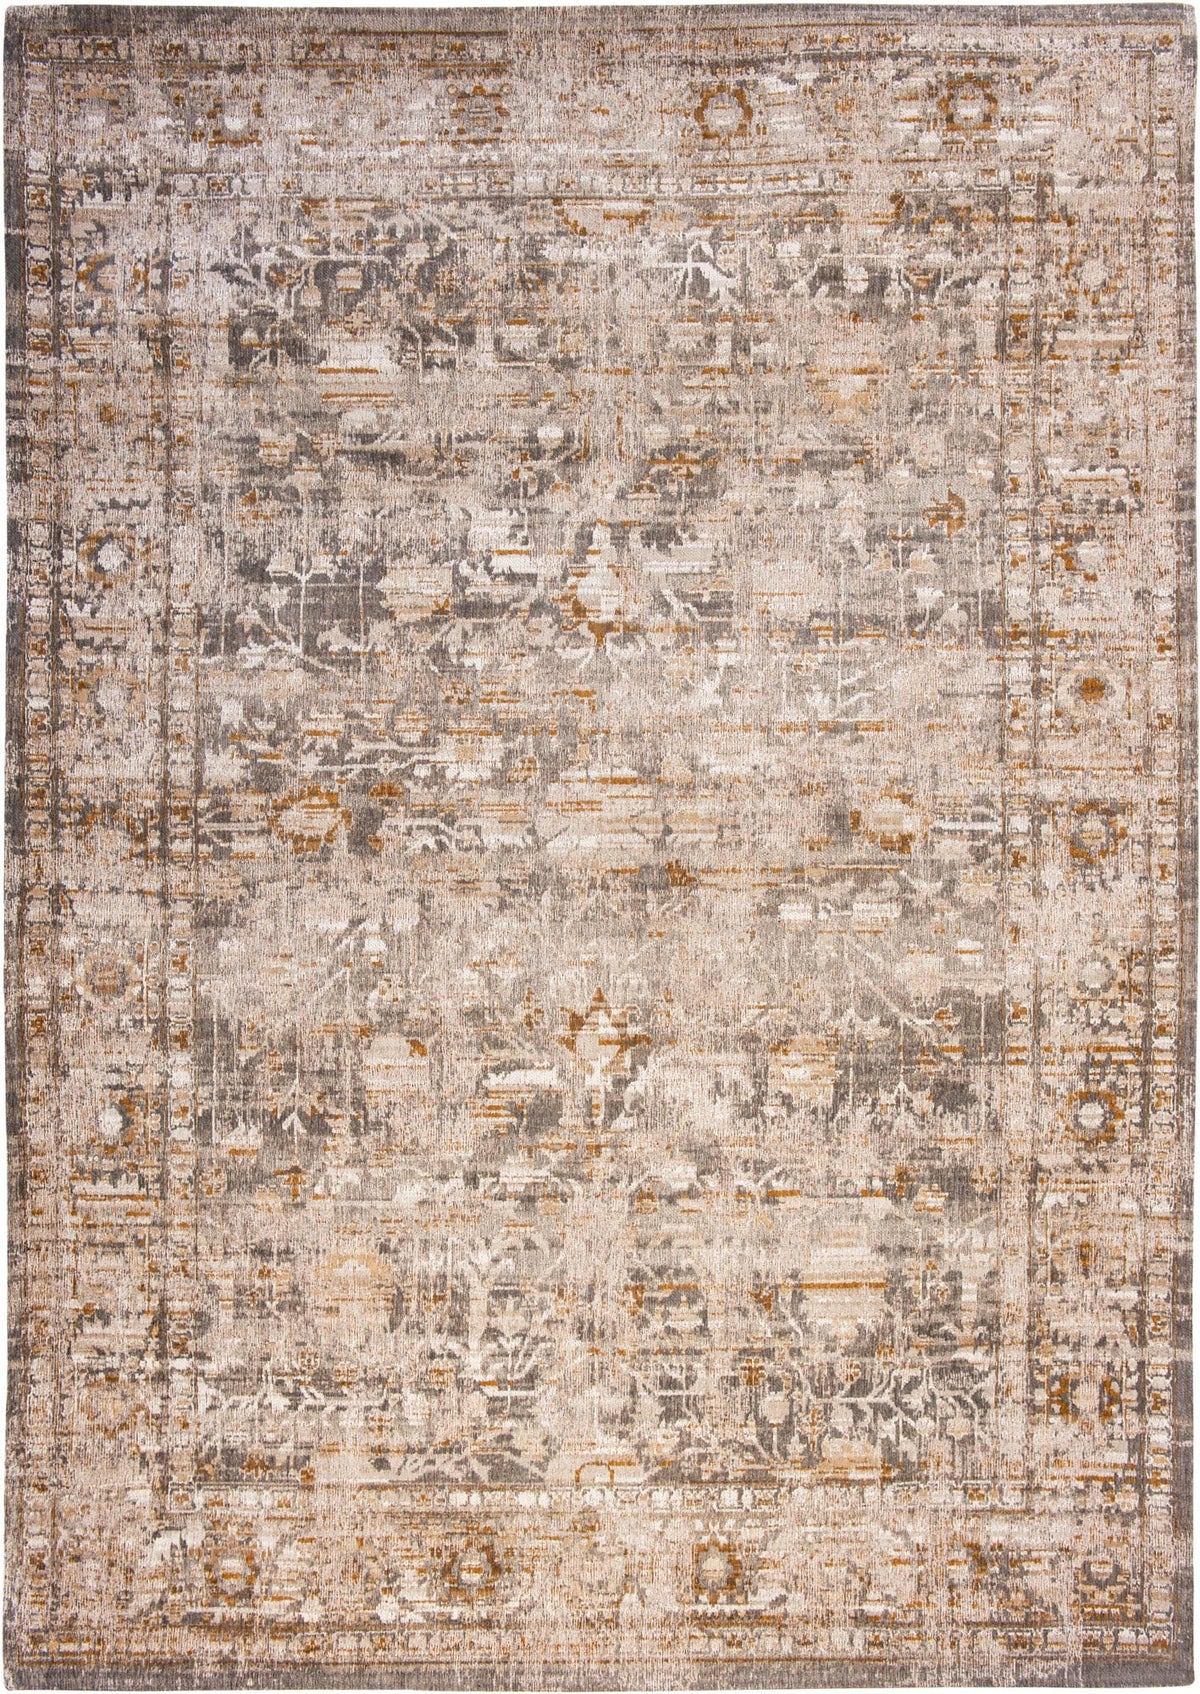 Full view of patterns on beige distressed rug with central medallion, rosette shaped with a stair patterned parameter